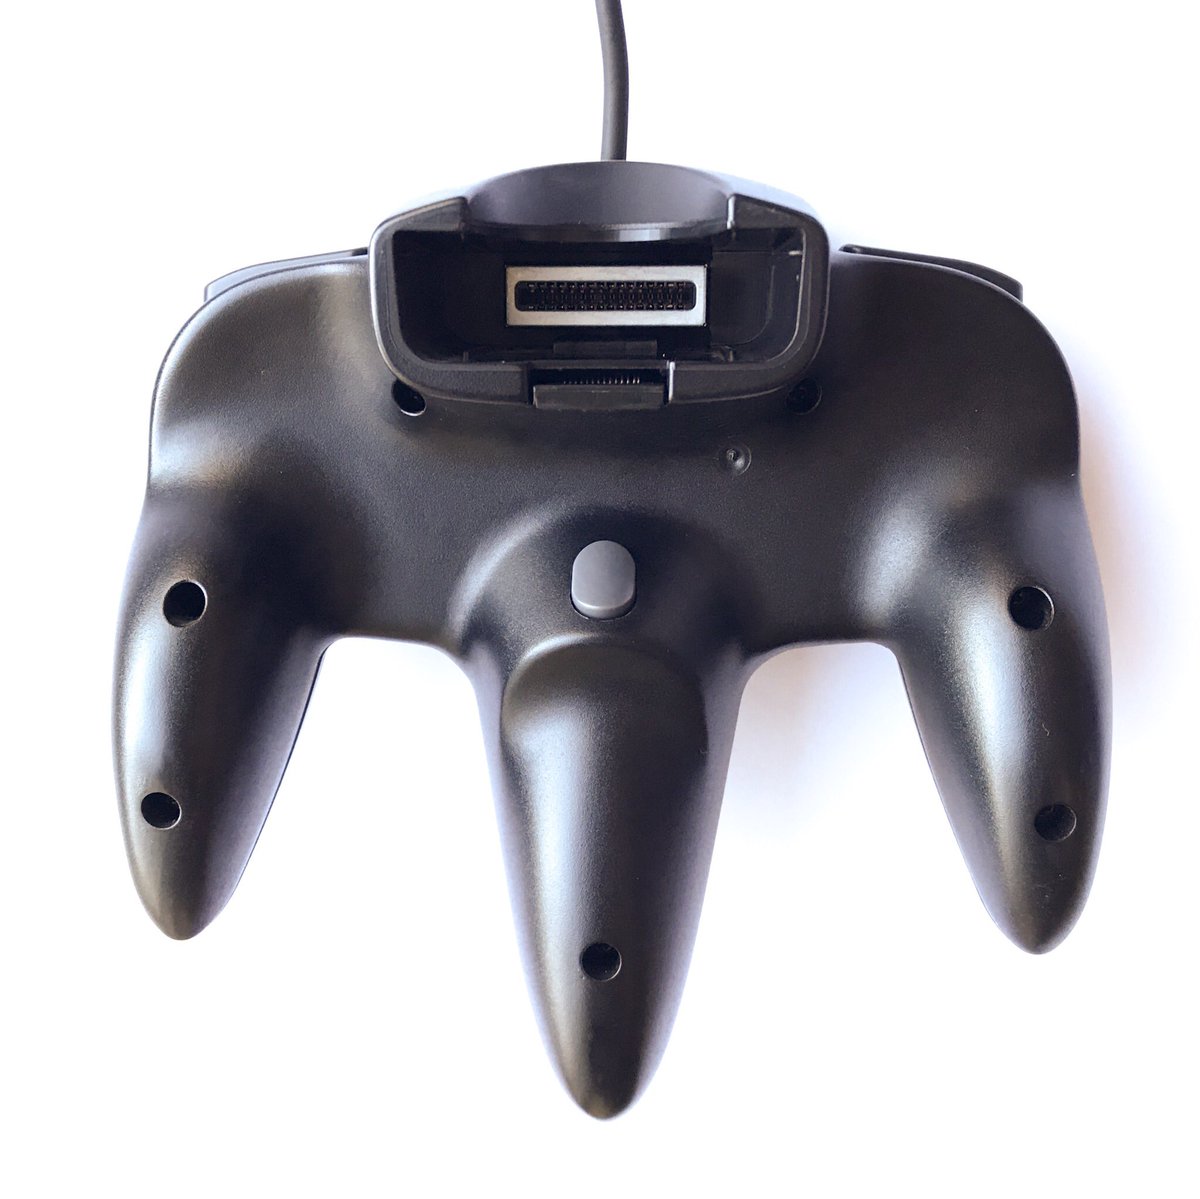 Prototype Ultra 64 controller found in the wild, new photos